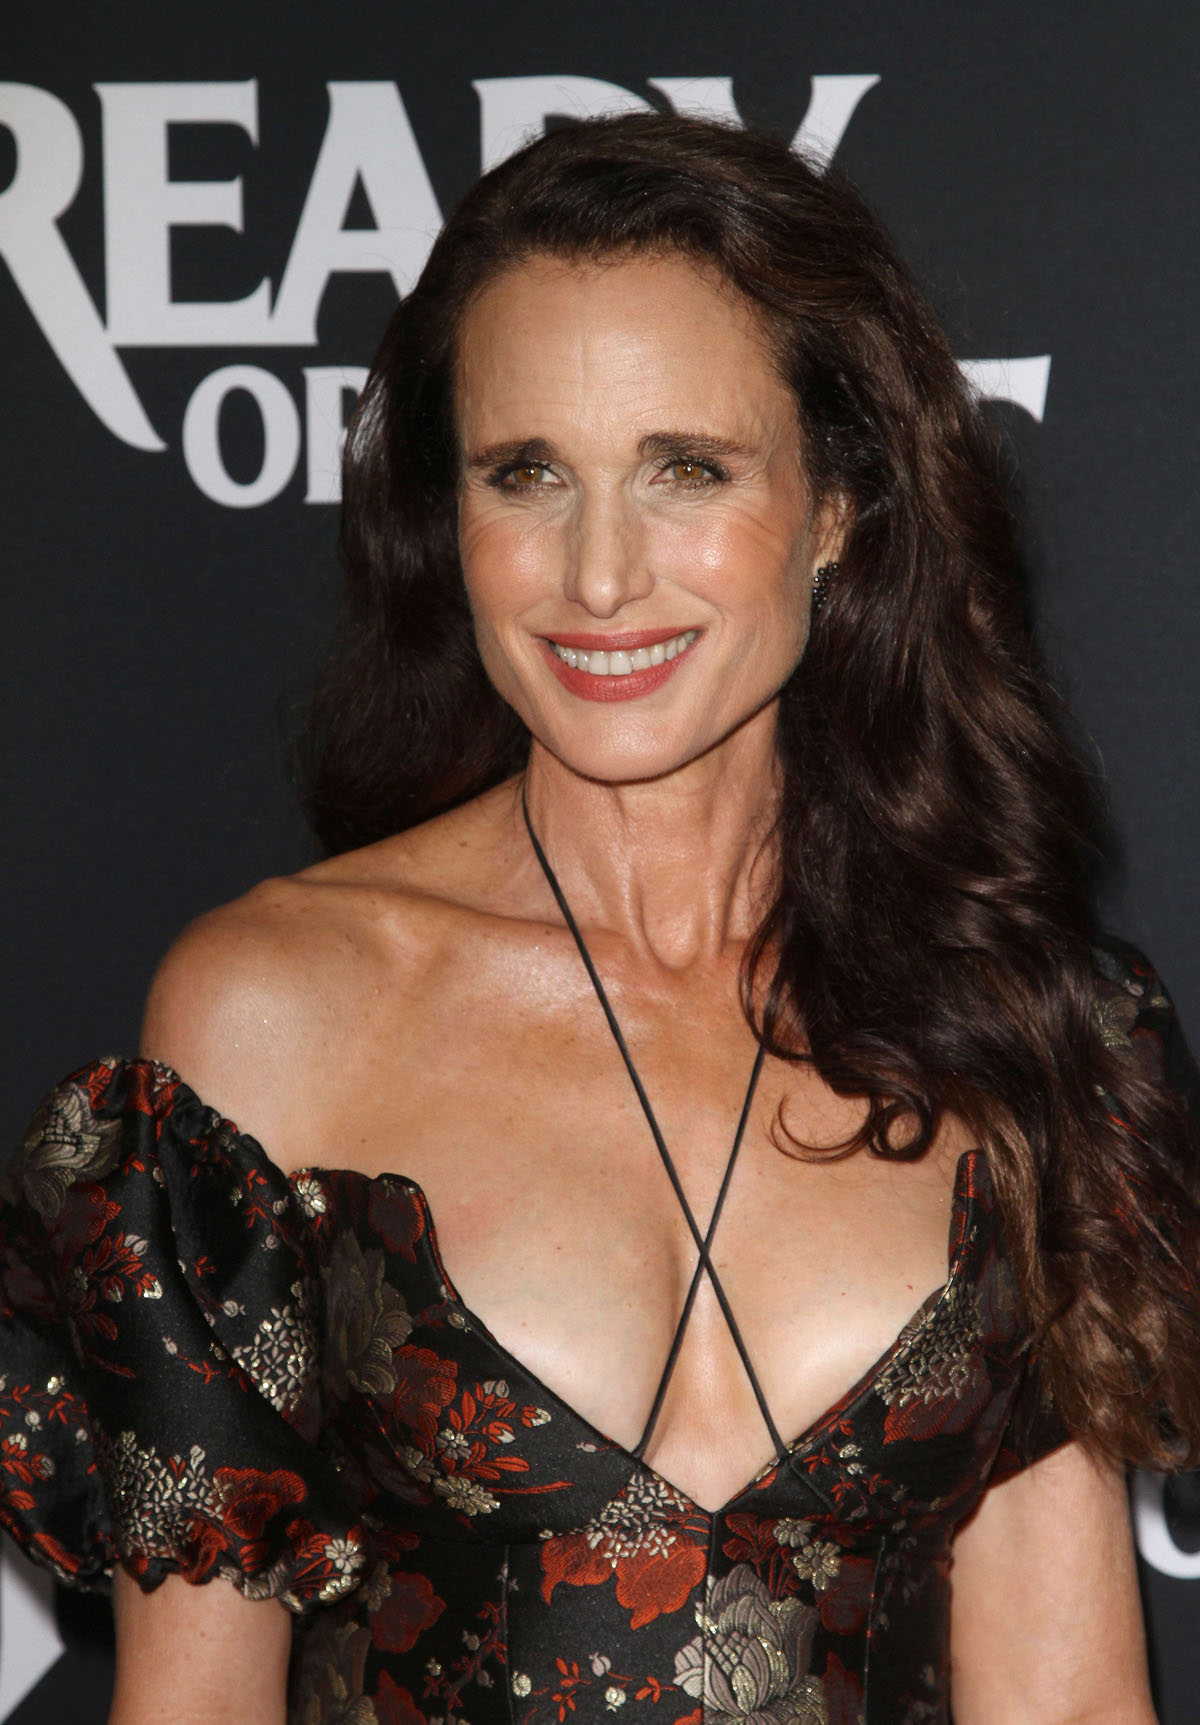 Andie MacDowell attends the premiere of "Ready Or not" in Los Angeles